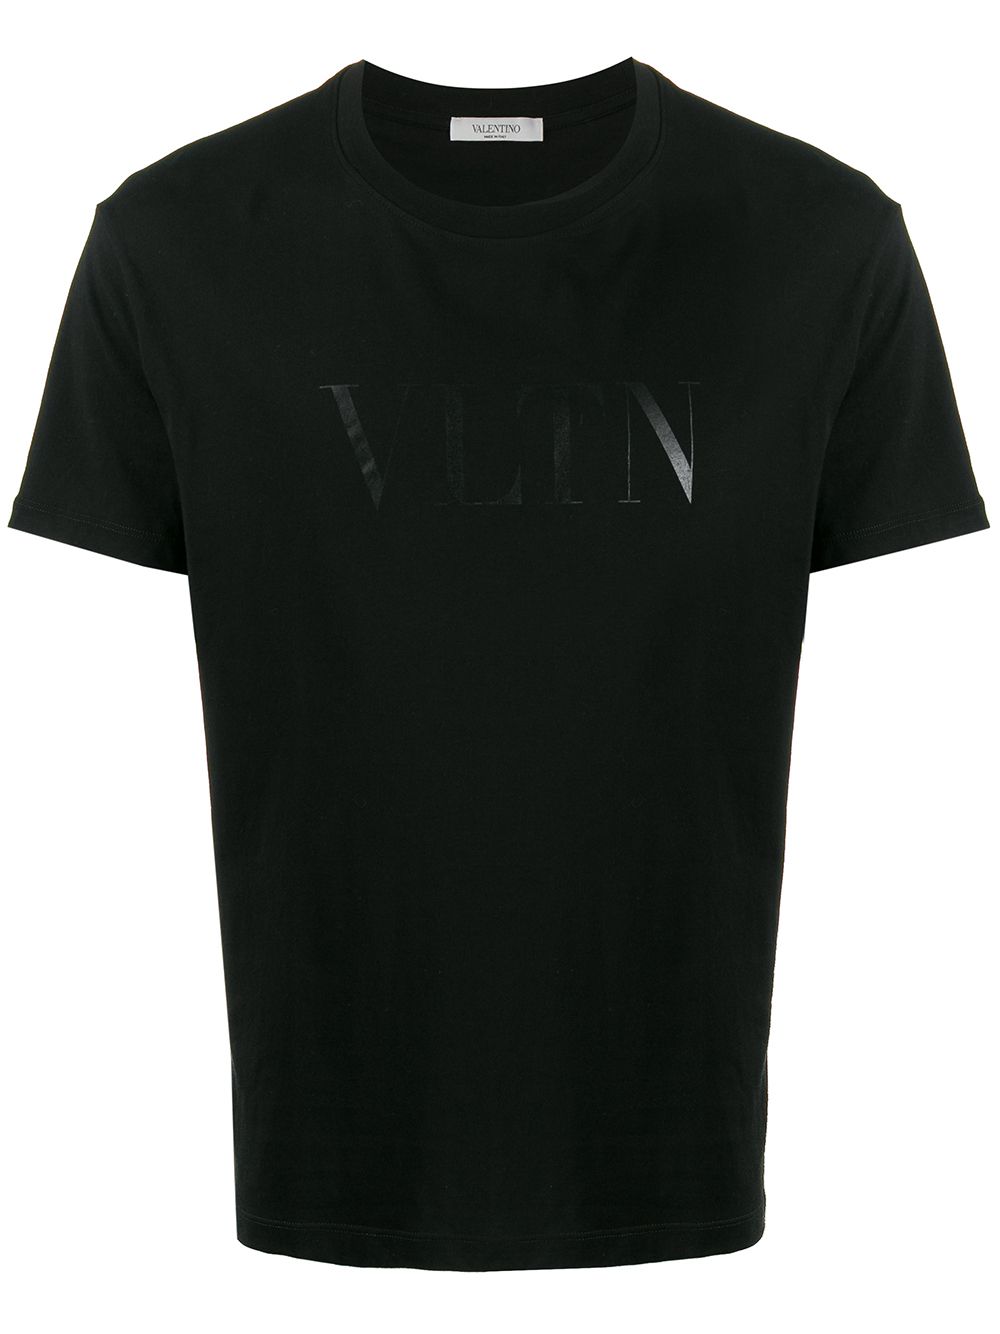 Shop Valentino VLTN print T-shirt with Express Delivery - FARFETCH